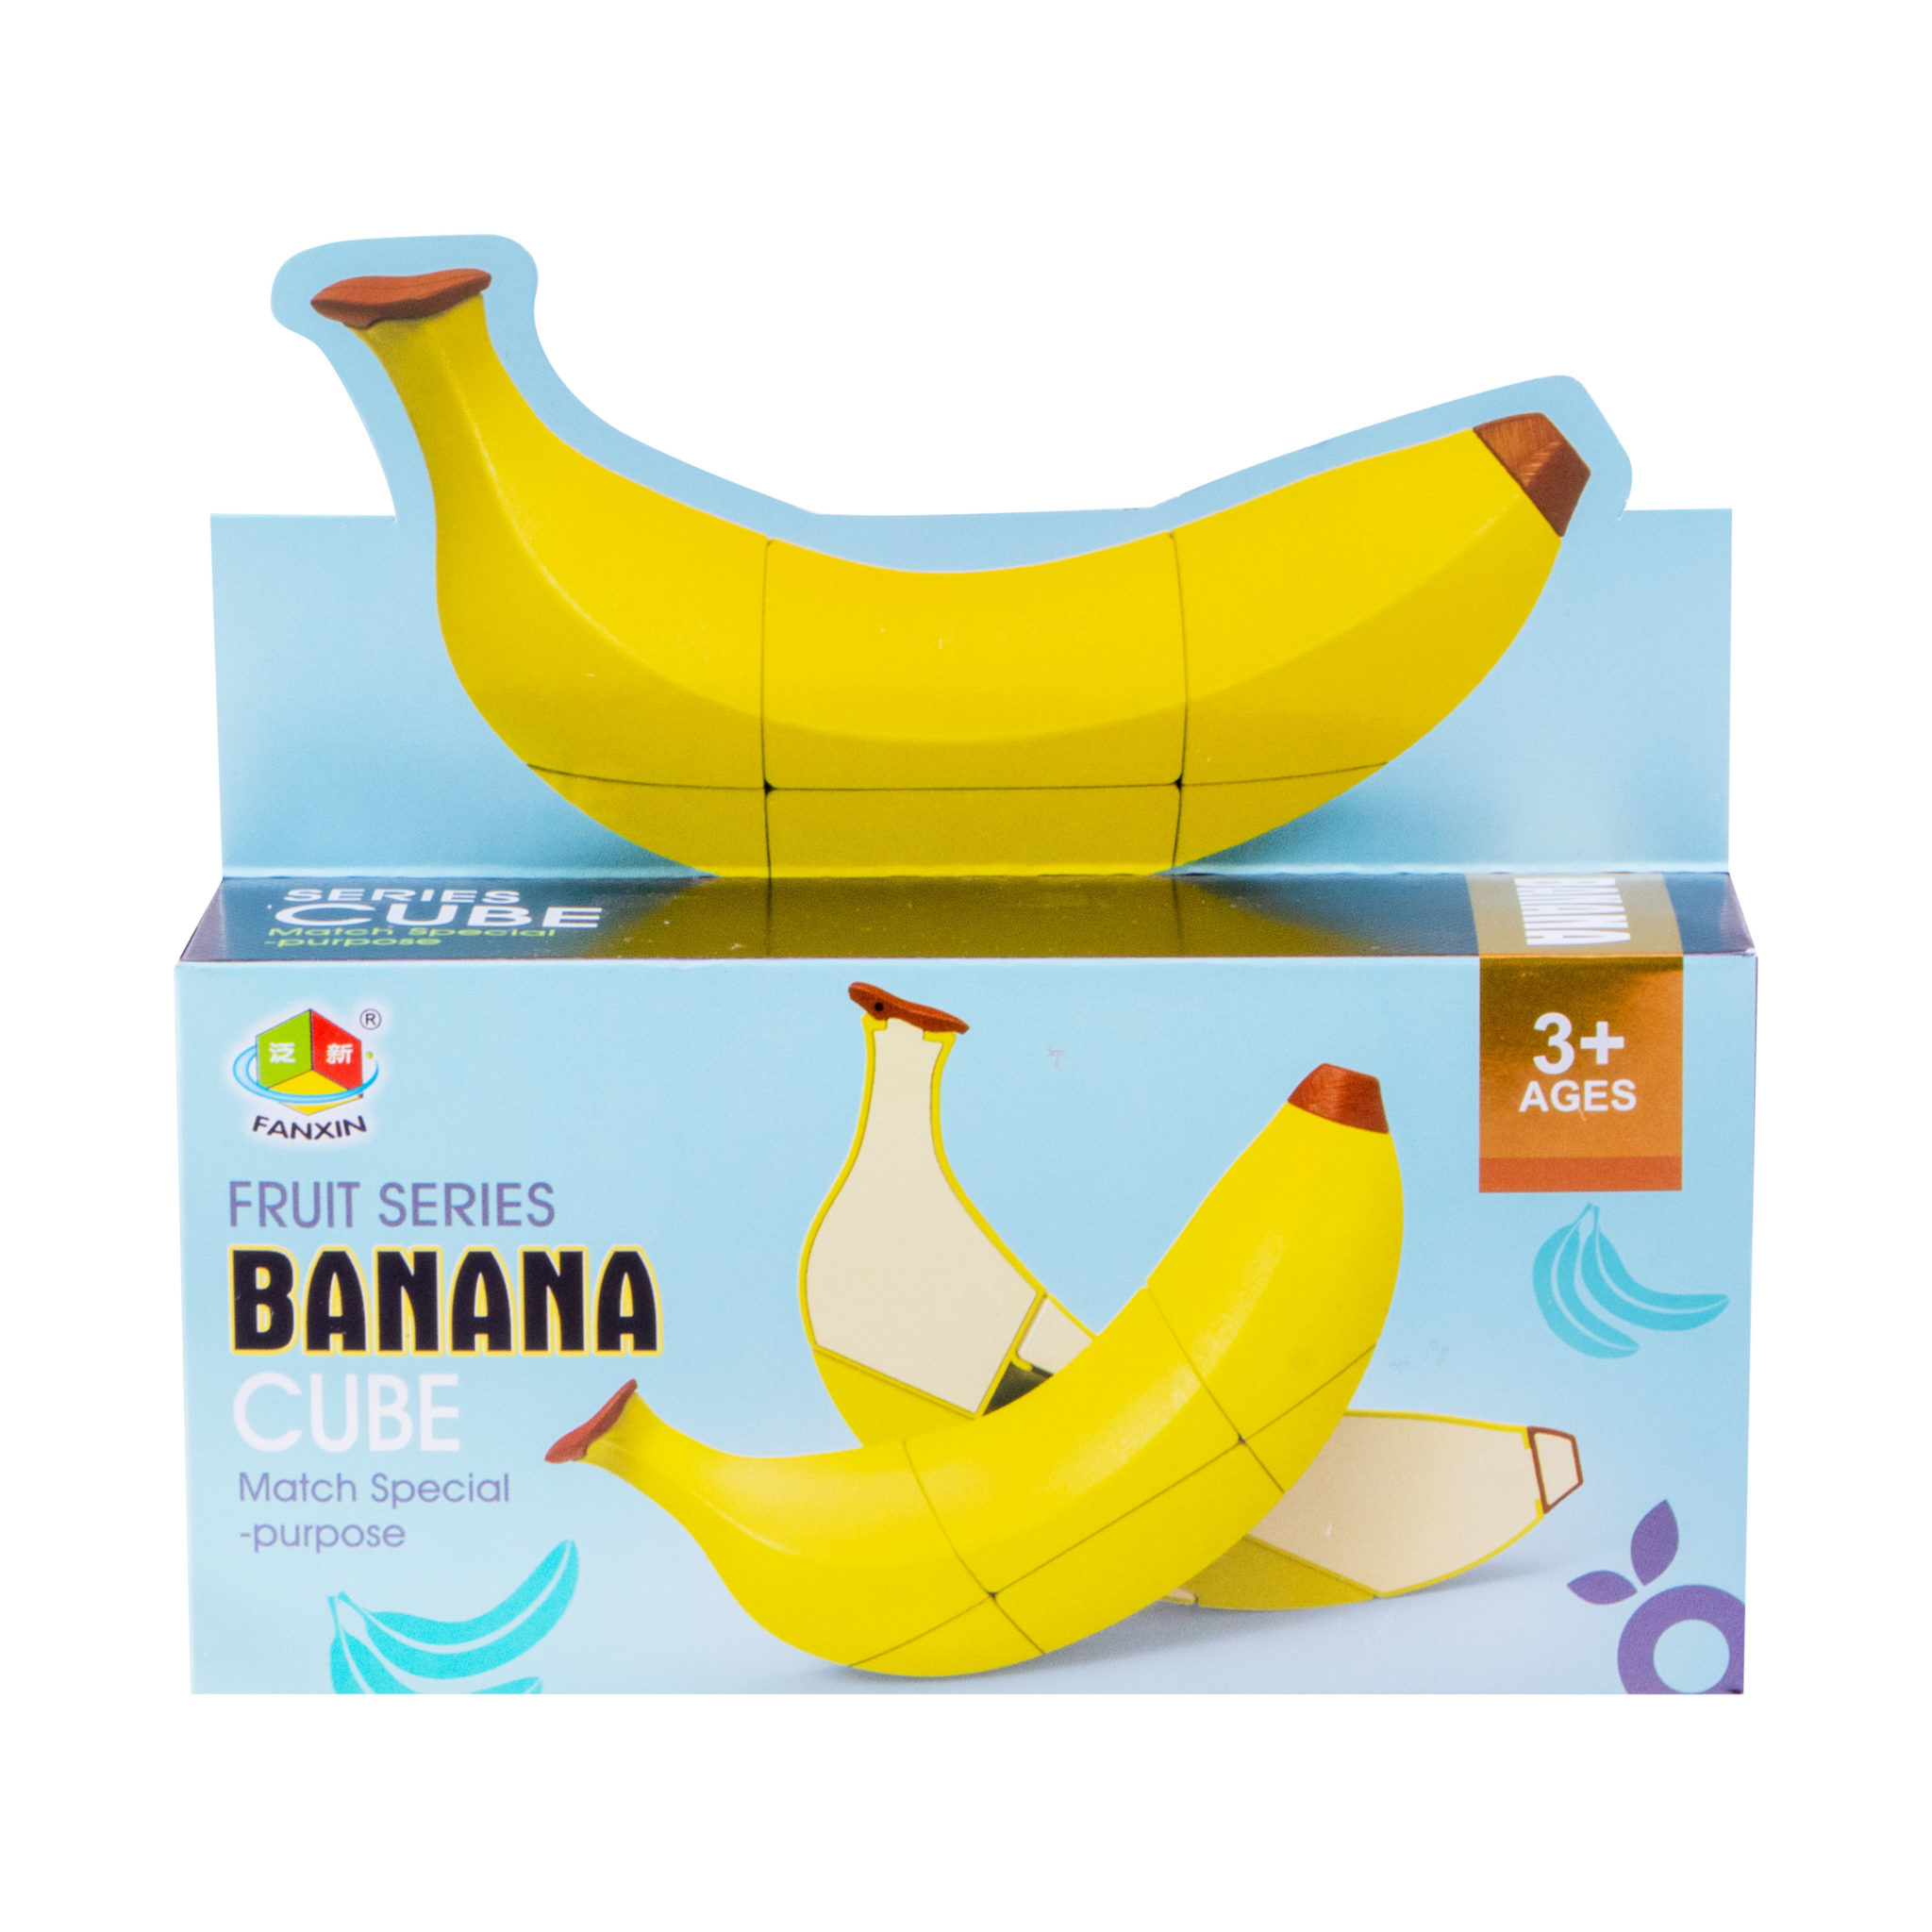 Banana Cube – Value Co – South Africa